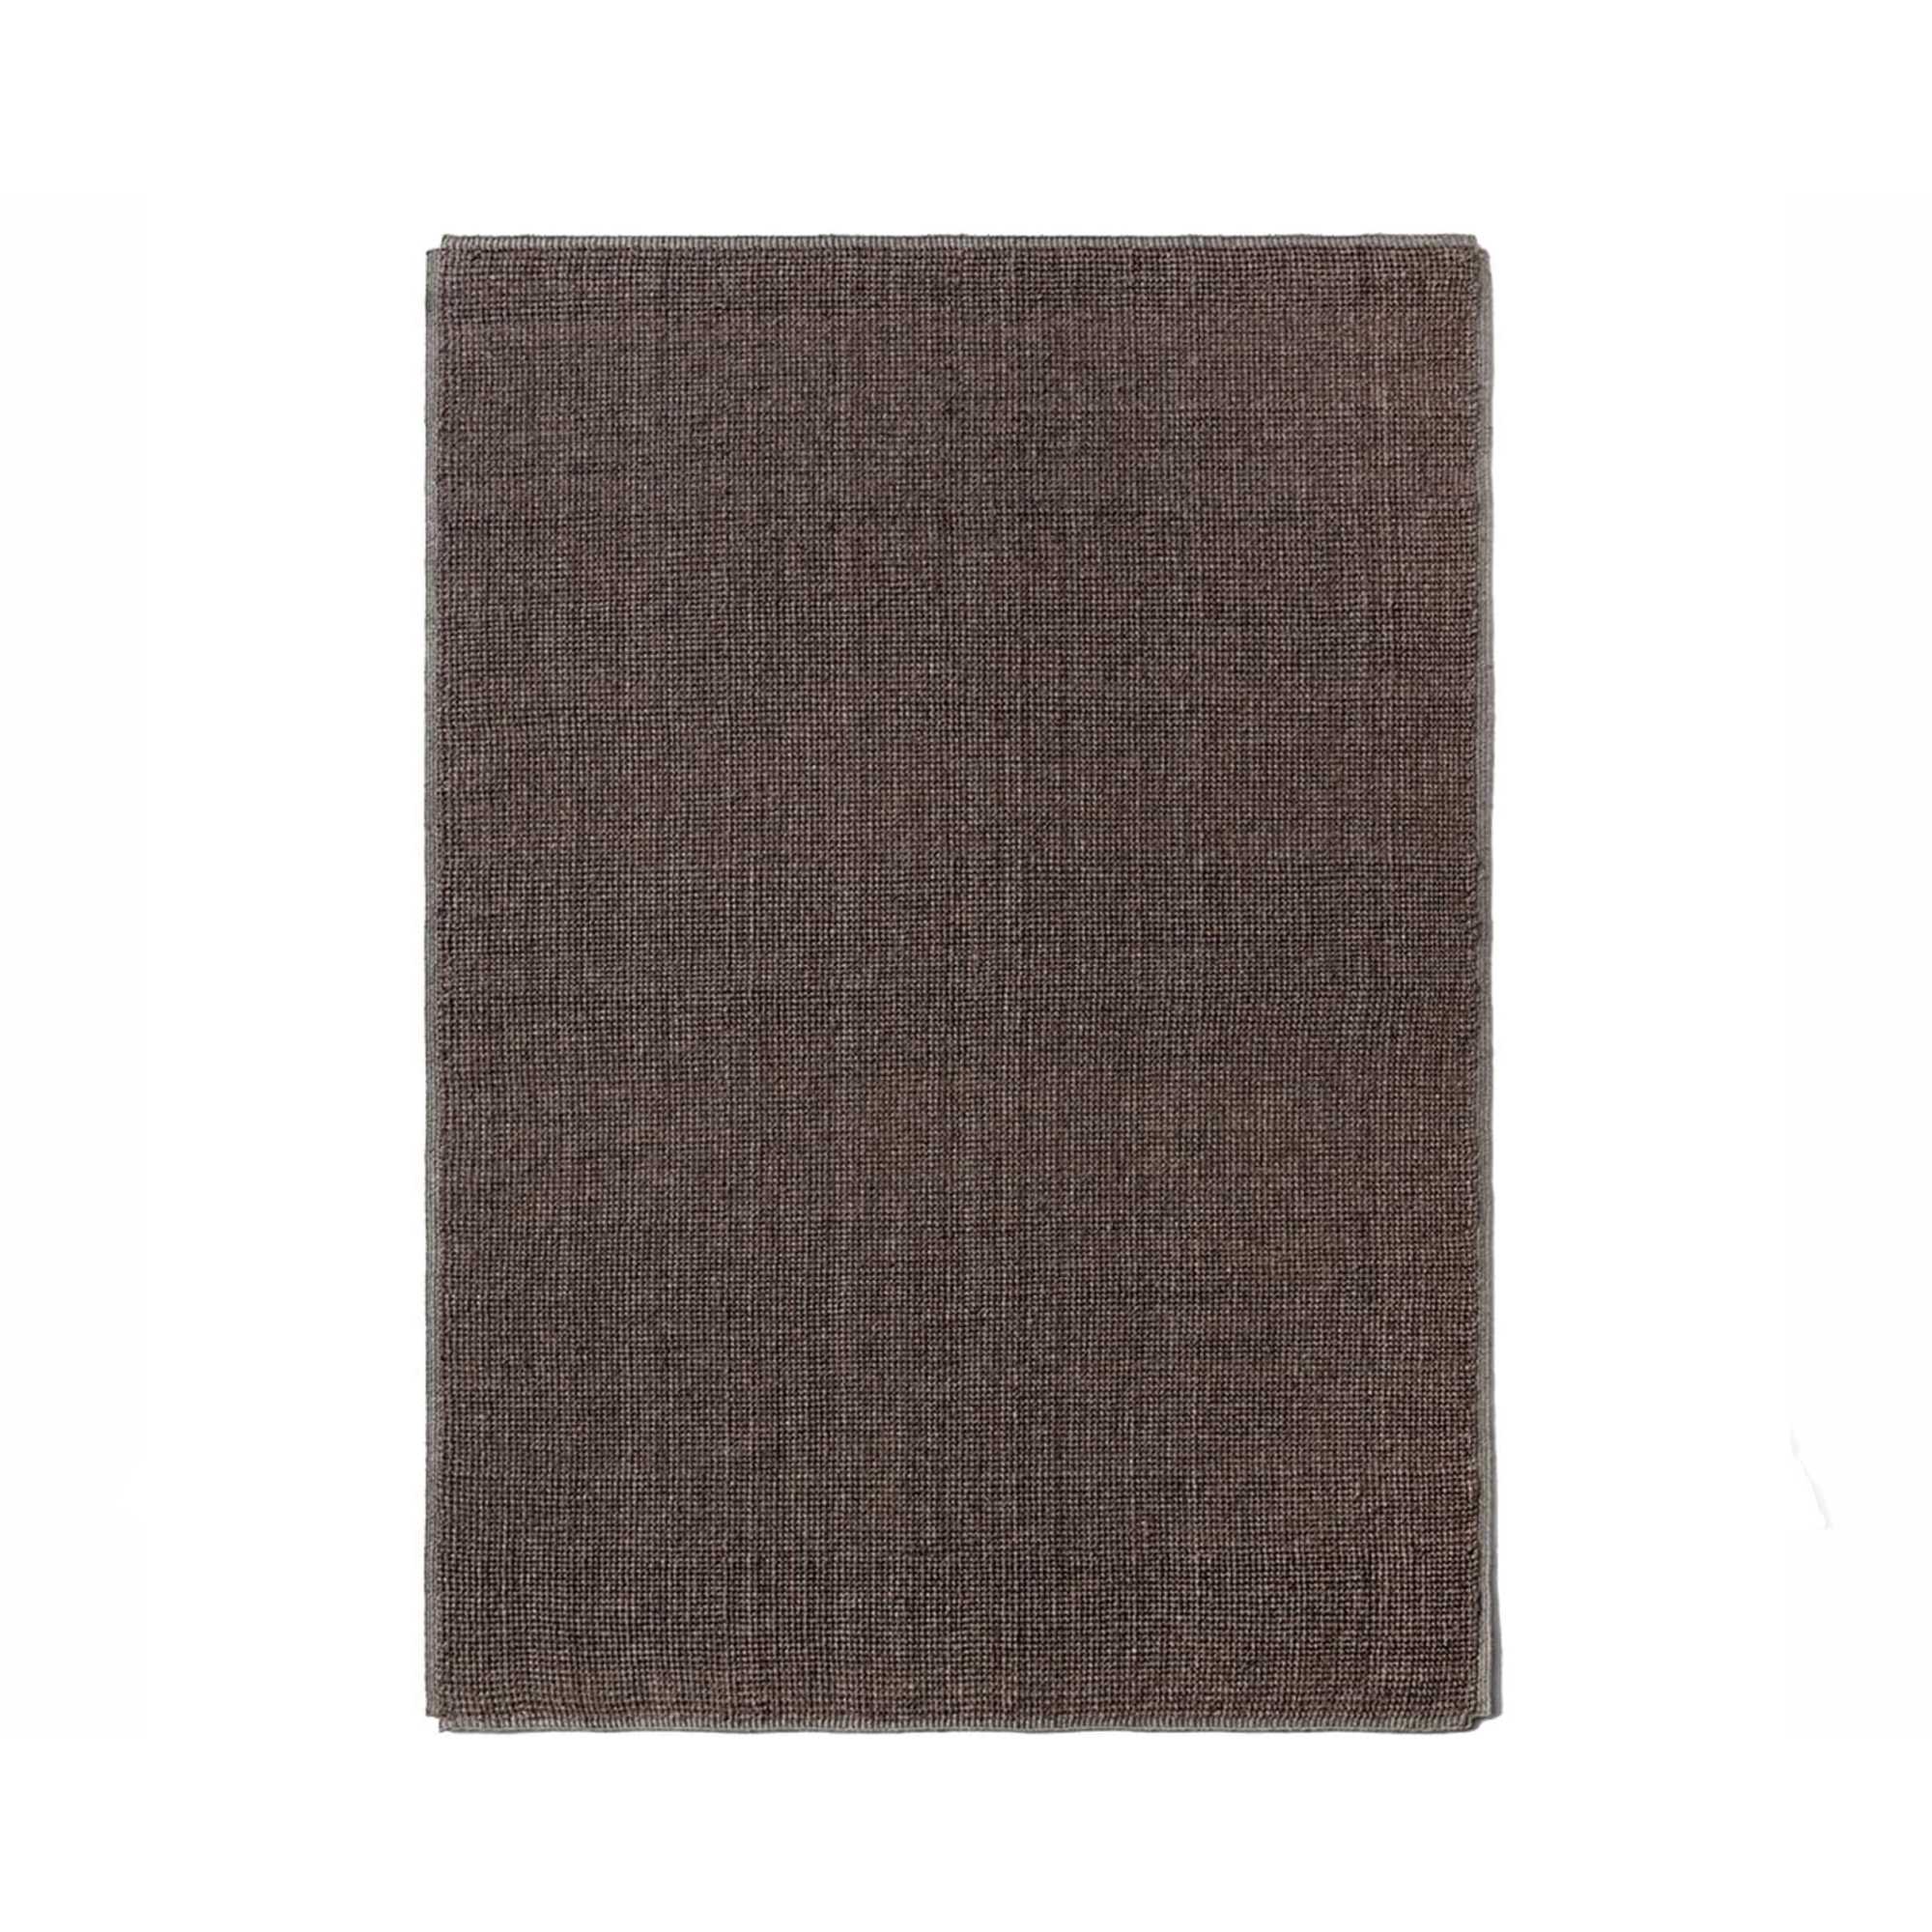 &Tradition SC84 Collect rug (170x240cm), stone